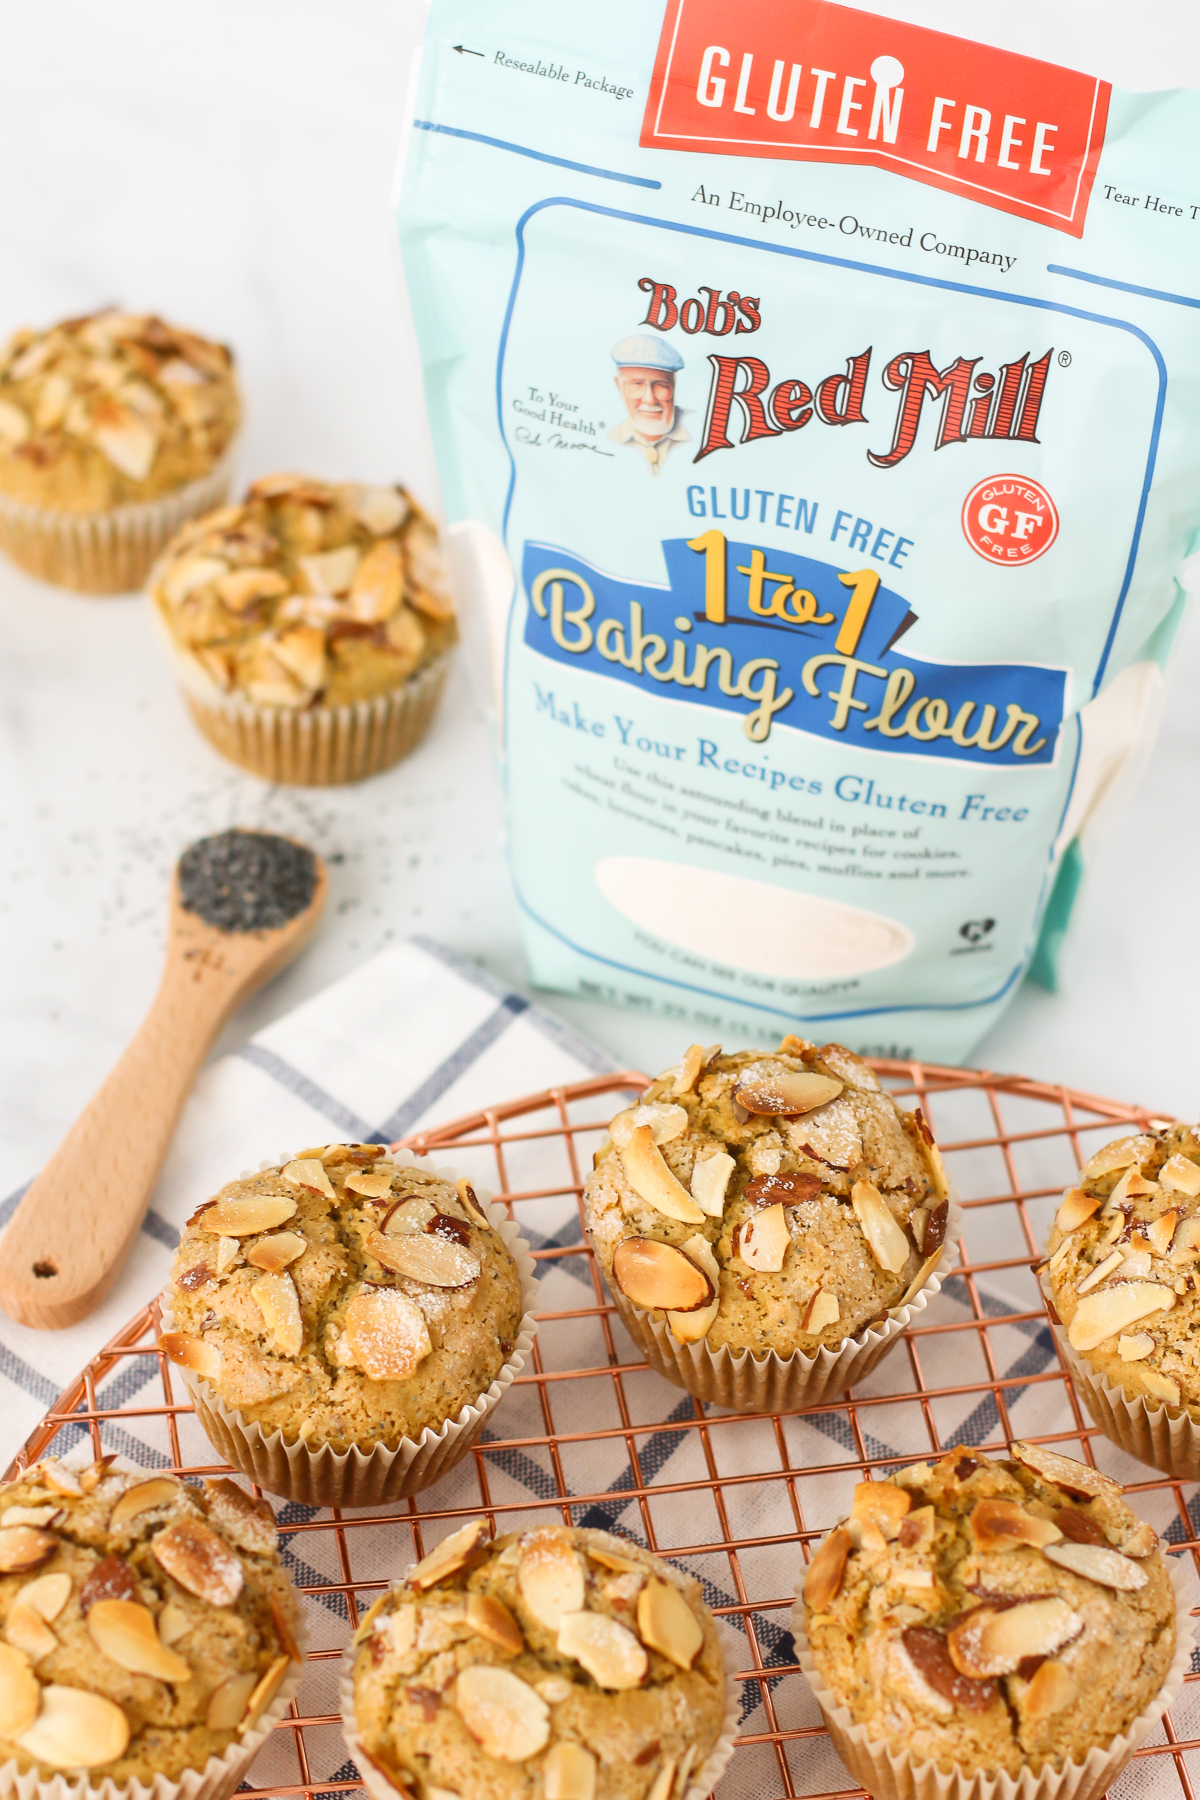 Tender poppyseed muffins, with the crunch of toasted almonds. These gluten free vegan almond poppyseed muffins are baked to perfection, using Bob’s Red Mill Gluten Free 1-to-1 Baking Flour!